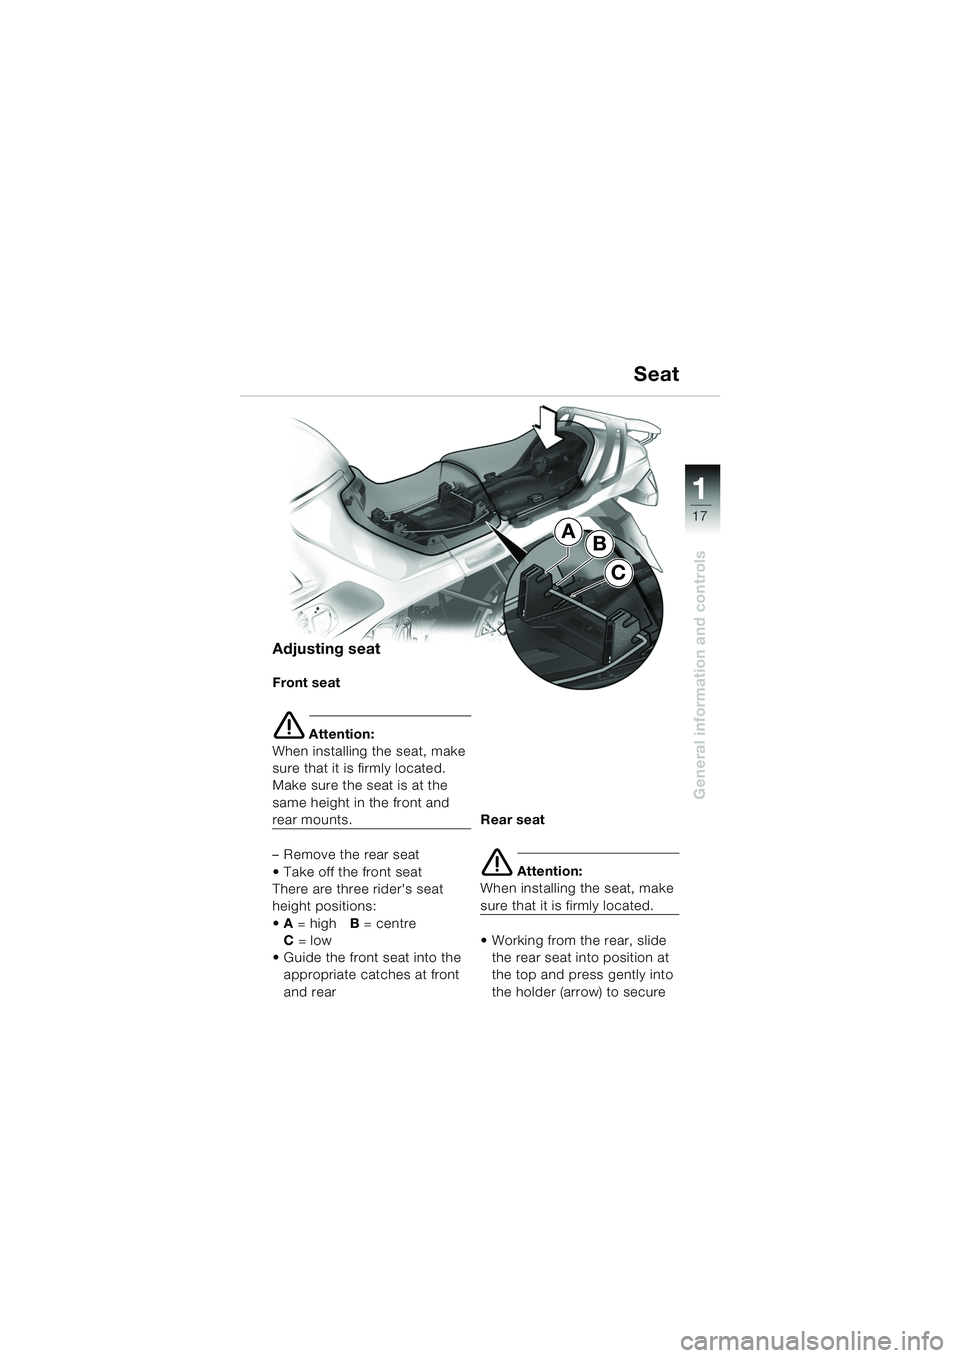 BMW MOTORRAD R 1150 RS 2002  Riders Manual (in English) 1
General information and controls
17
AB
C
Adjusting seat
Front seat
e Attention:
When installing the seat, make 
sure that it is firmly located.
Make sure the seat is at the 
same height in the front